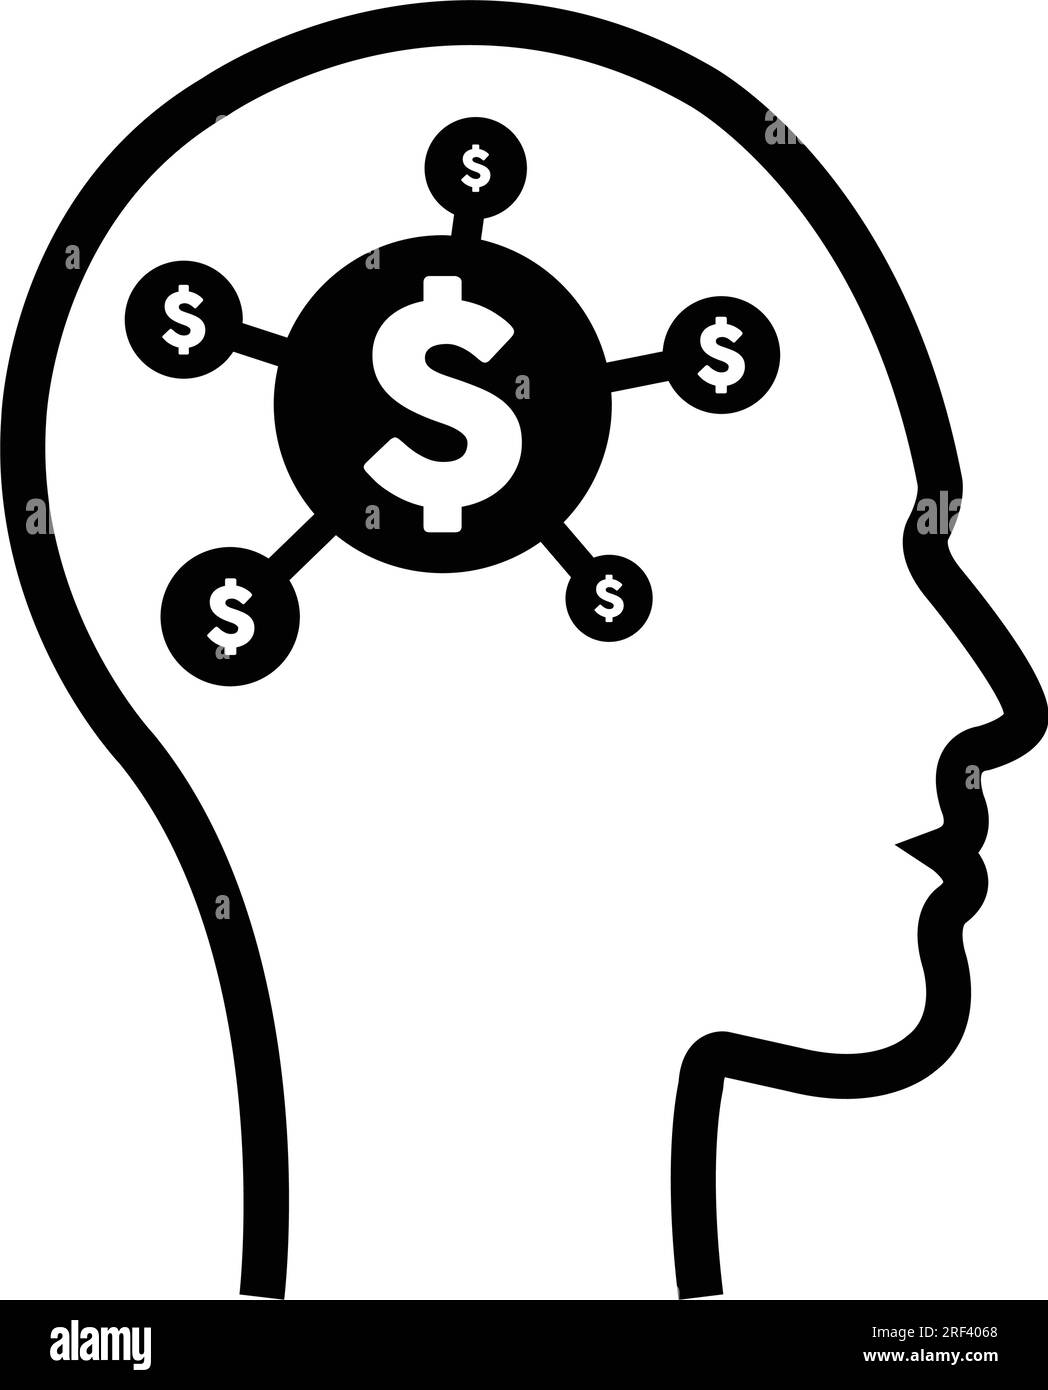 A dollar sign icon on a human profile face with a brain chip implant for Artificial Intelligence finance illustration in glyph pictograms. Stock Vector